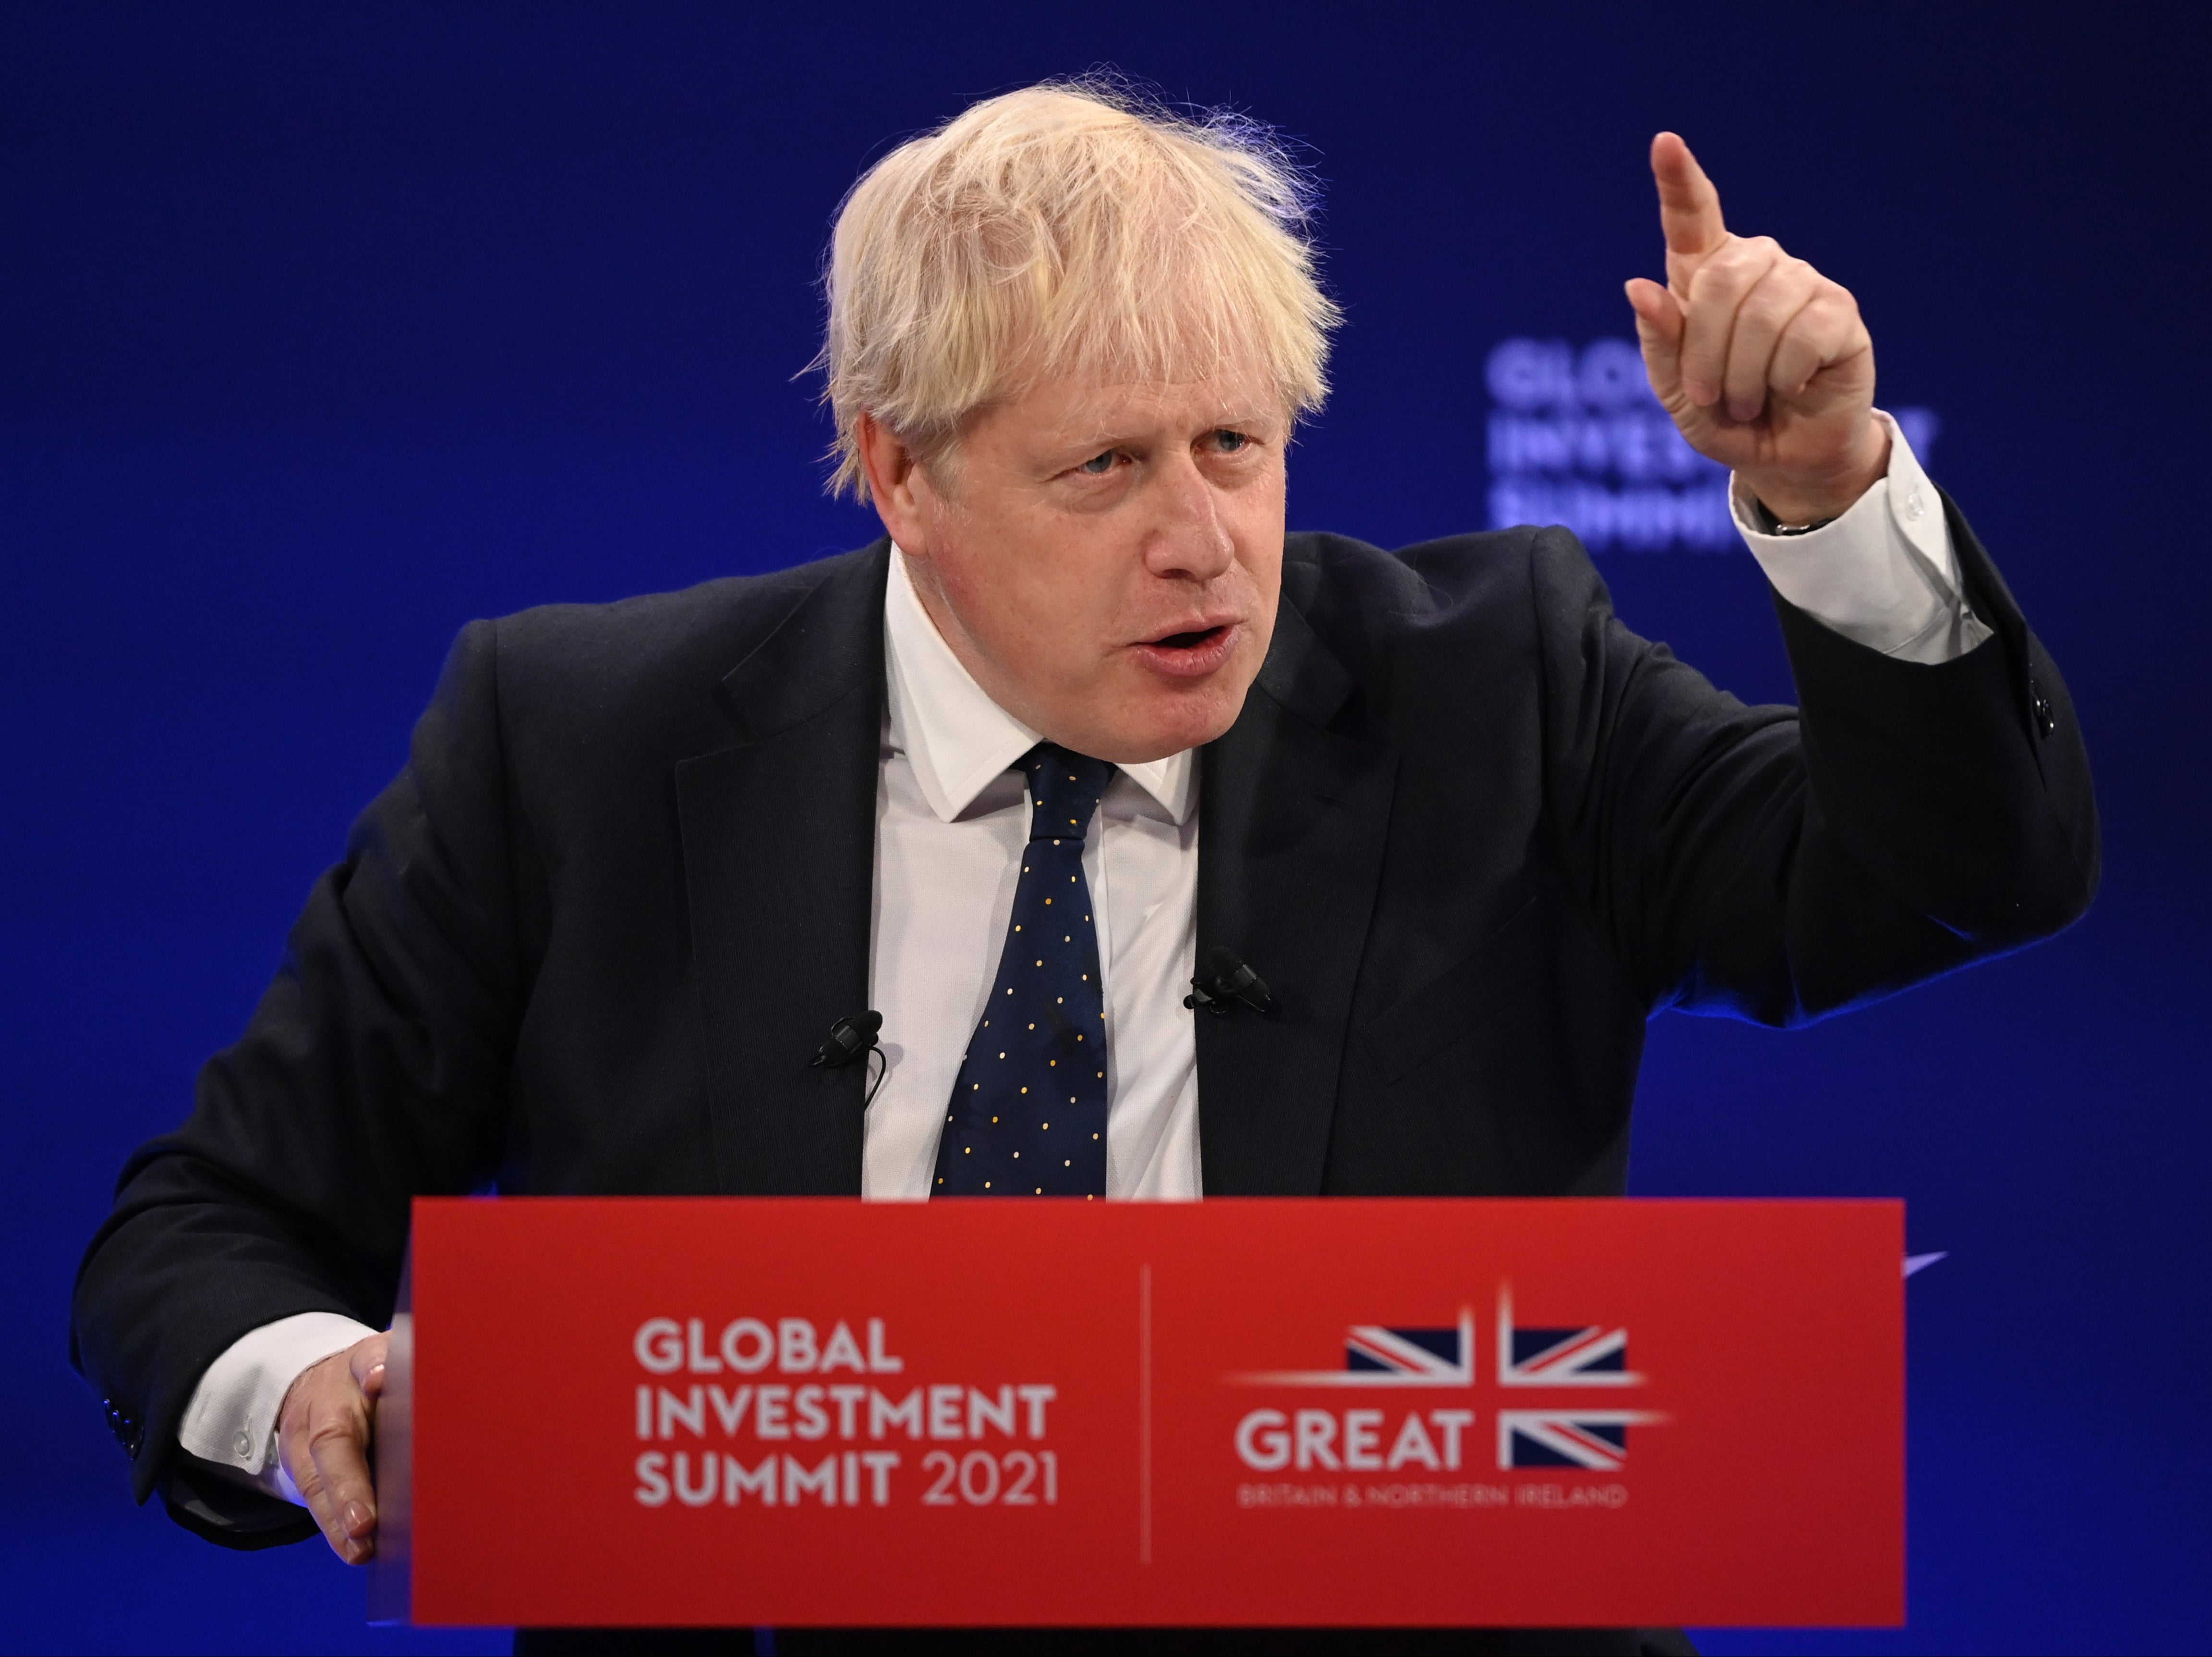 Boris Johnson was trying the hard sell on global investors at Tuesday’s summit.